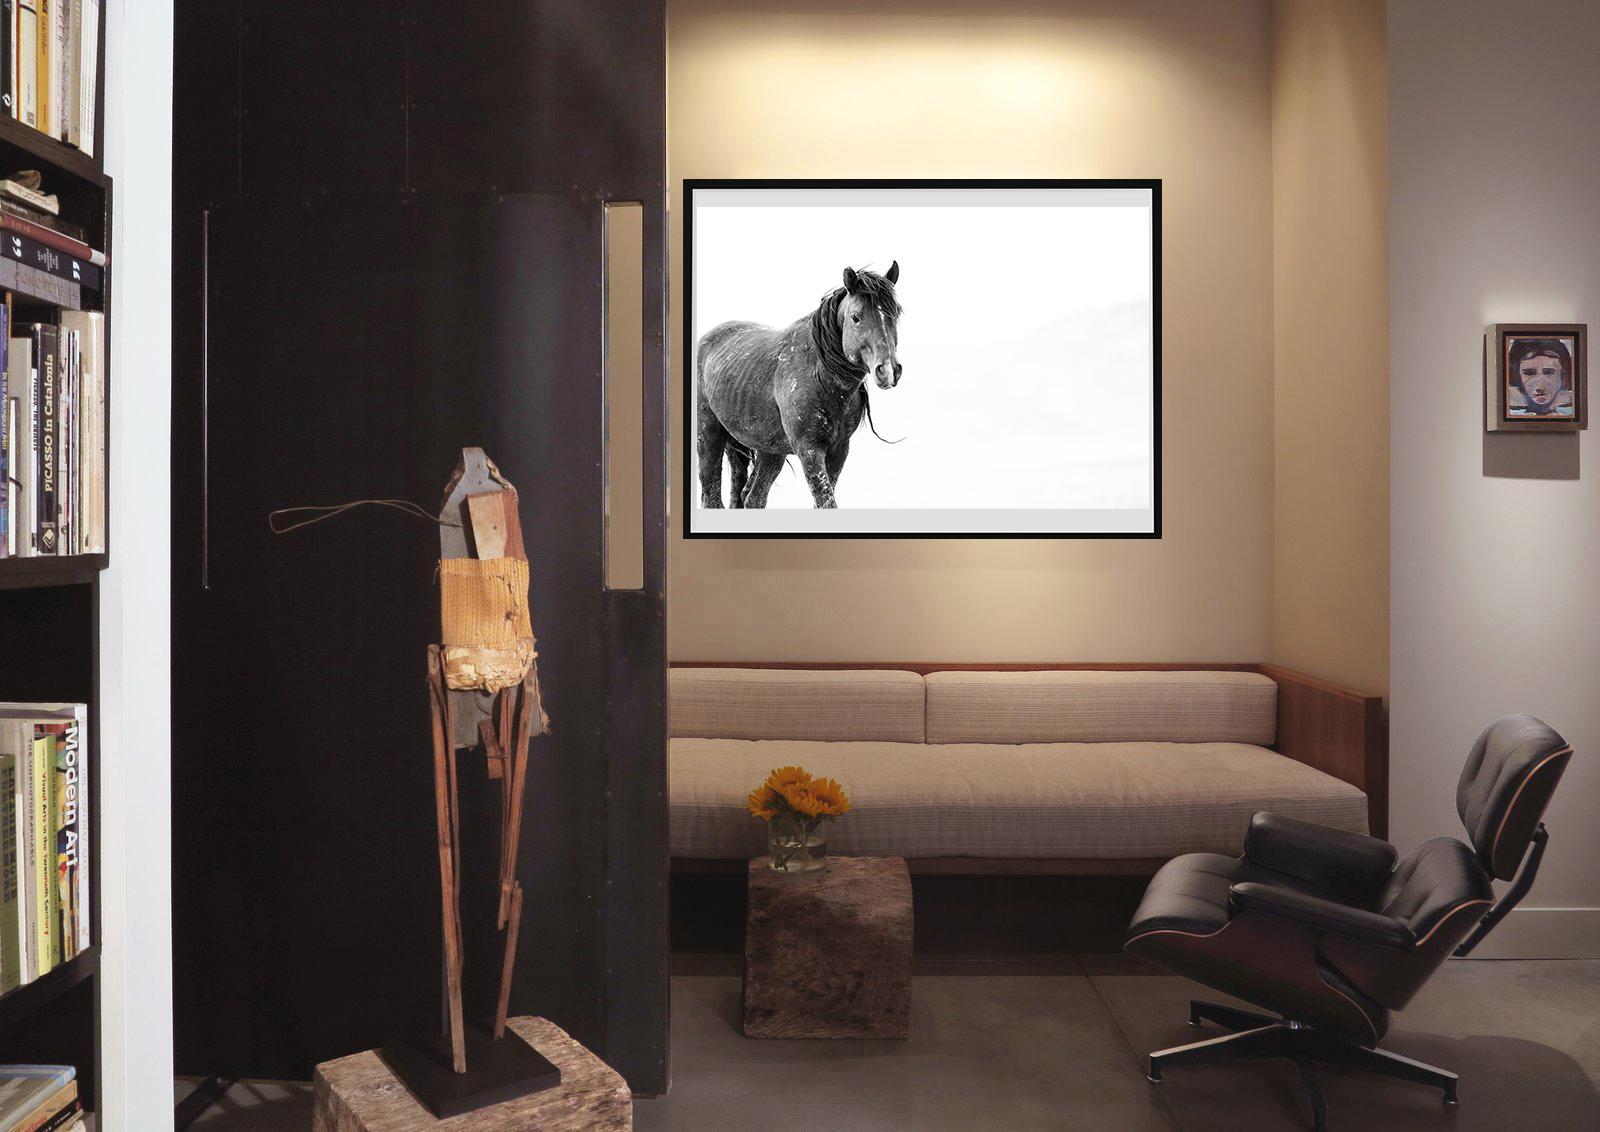 This is a contemporary photograph of a North American Wild Mustang
60x40 Edition of 10. 
Signed and numbered.
Archival pigment paper
Framing available. Inquire for rates. 


Shane Russeck has built a reputation for capturing America's landscapes,